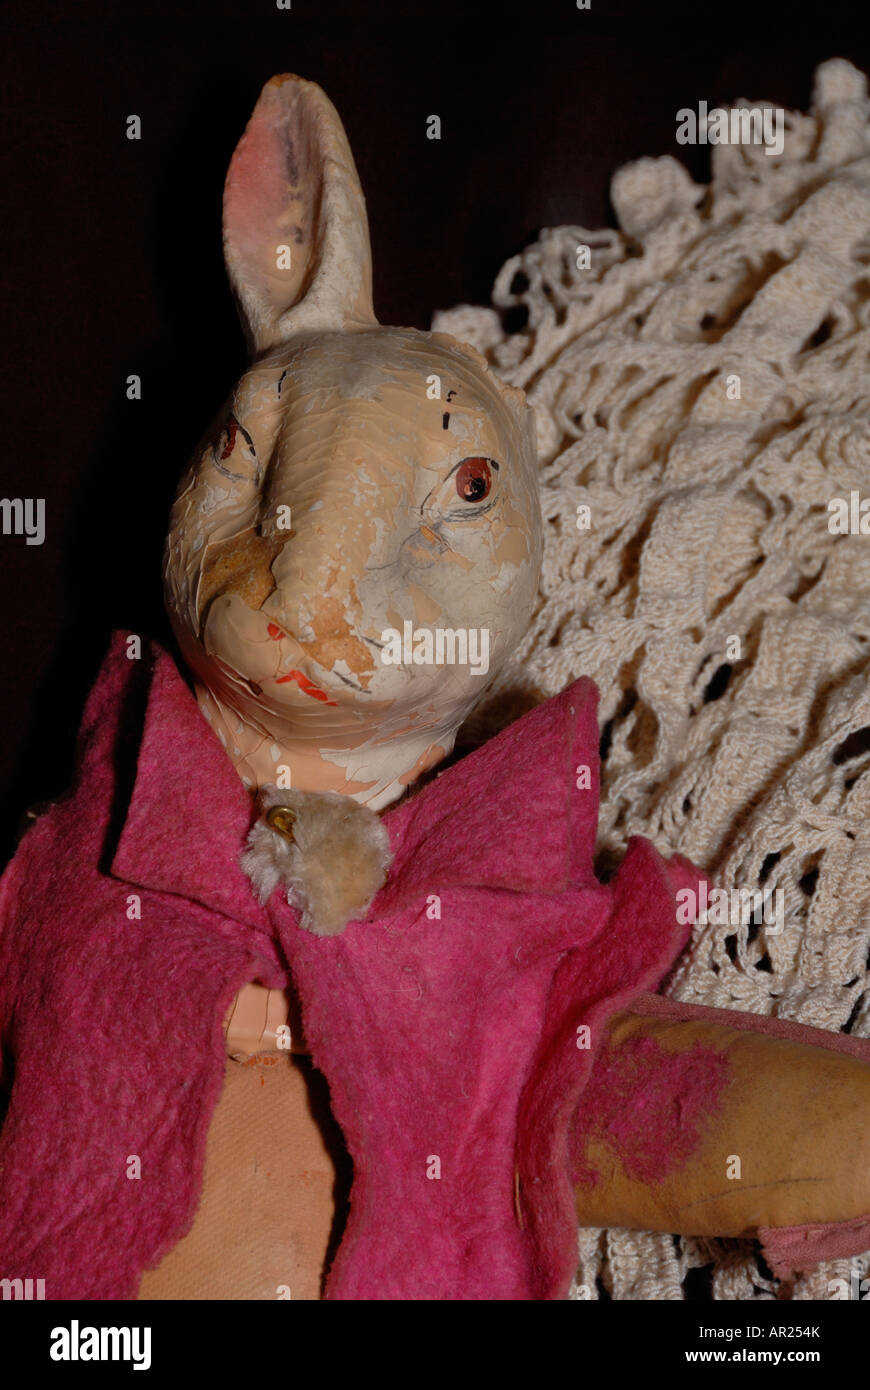 Antique bunny doll on lace afghan sitting on a couch Stock Photo